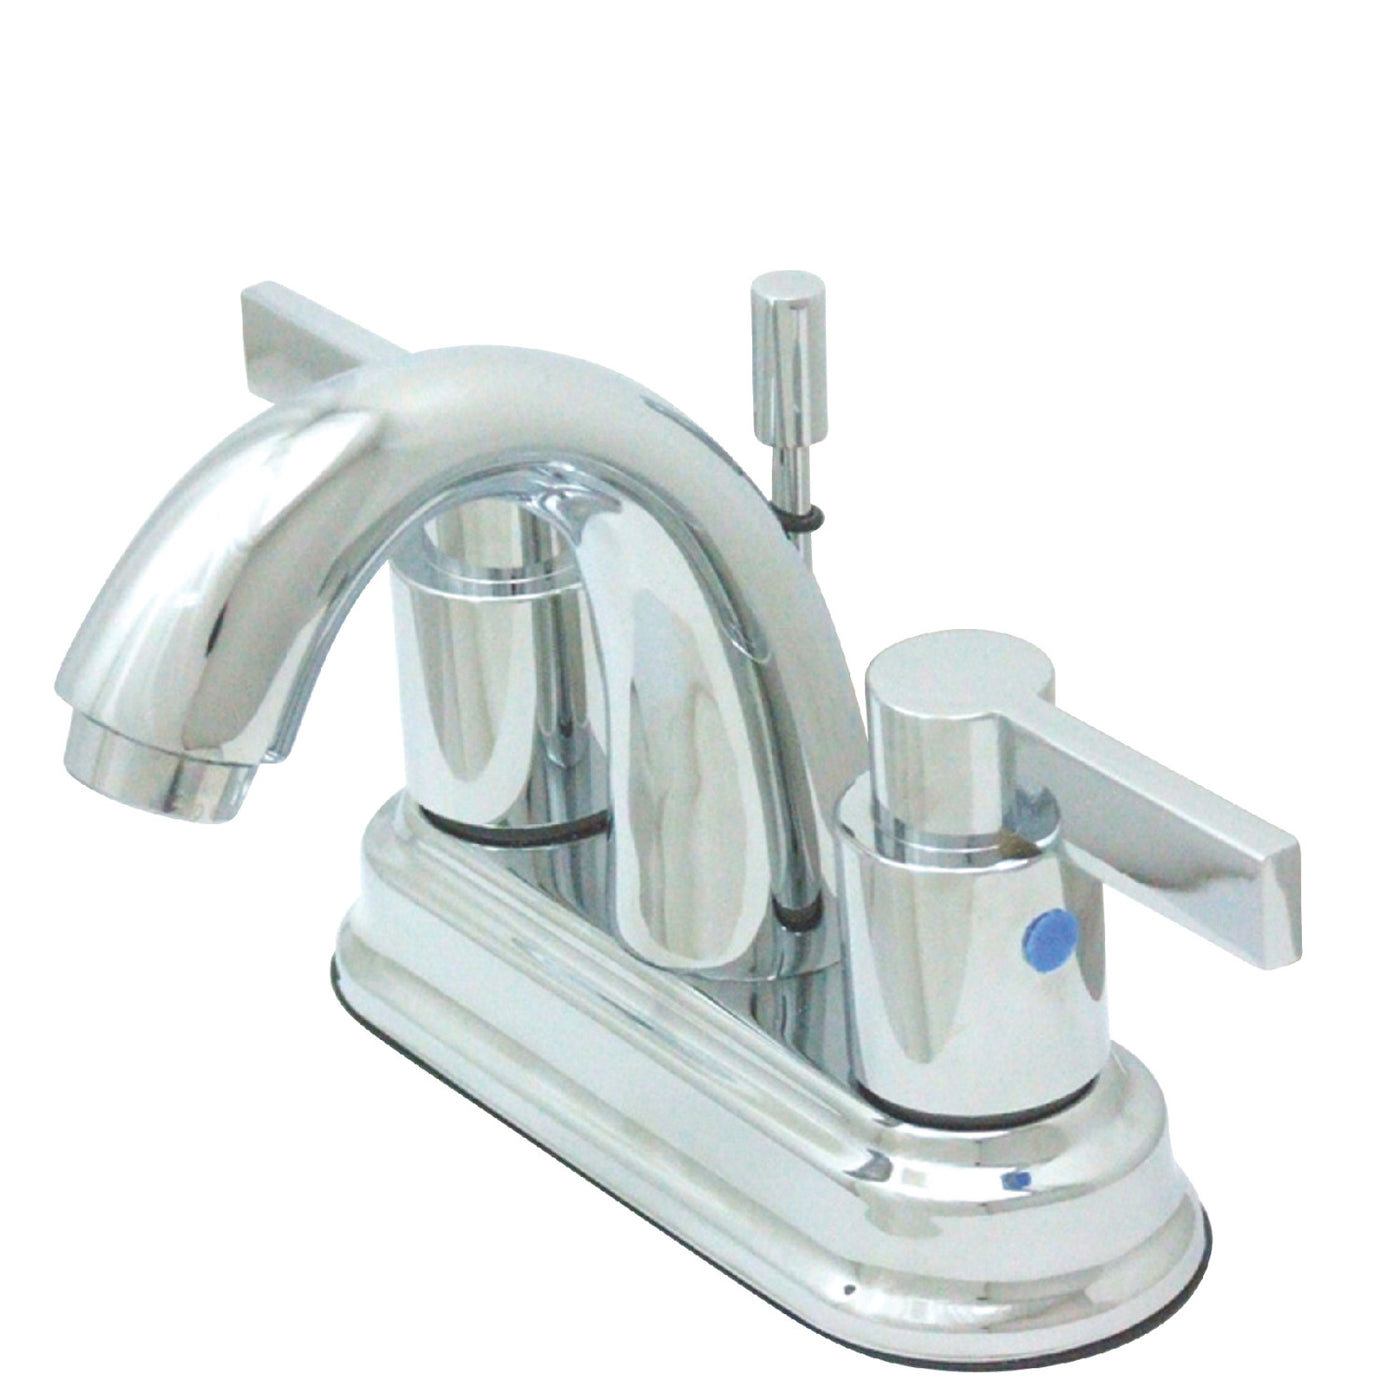 Elements of Design EB8611NDL 4-Inch Centerset Bathroom Faucet with Retail Pop-Up, Polished Chrome